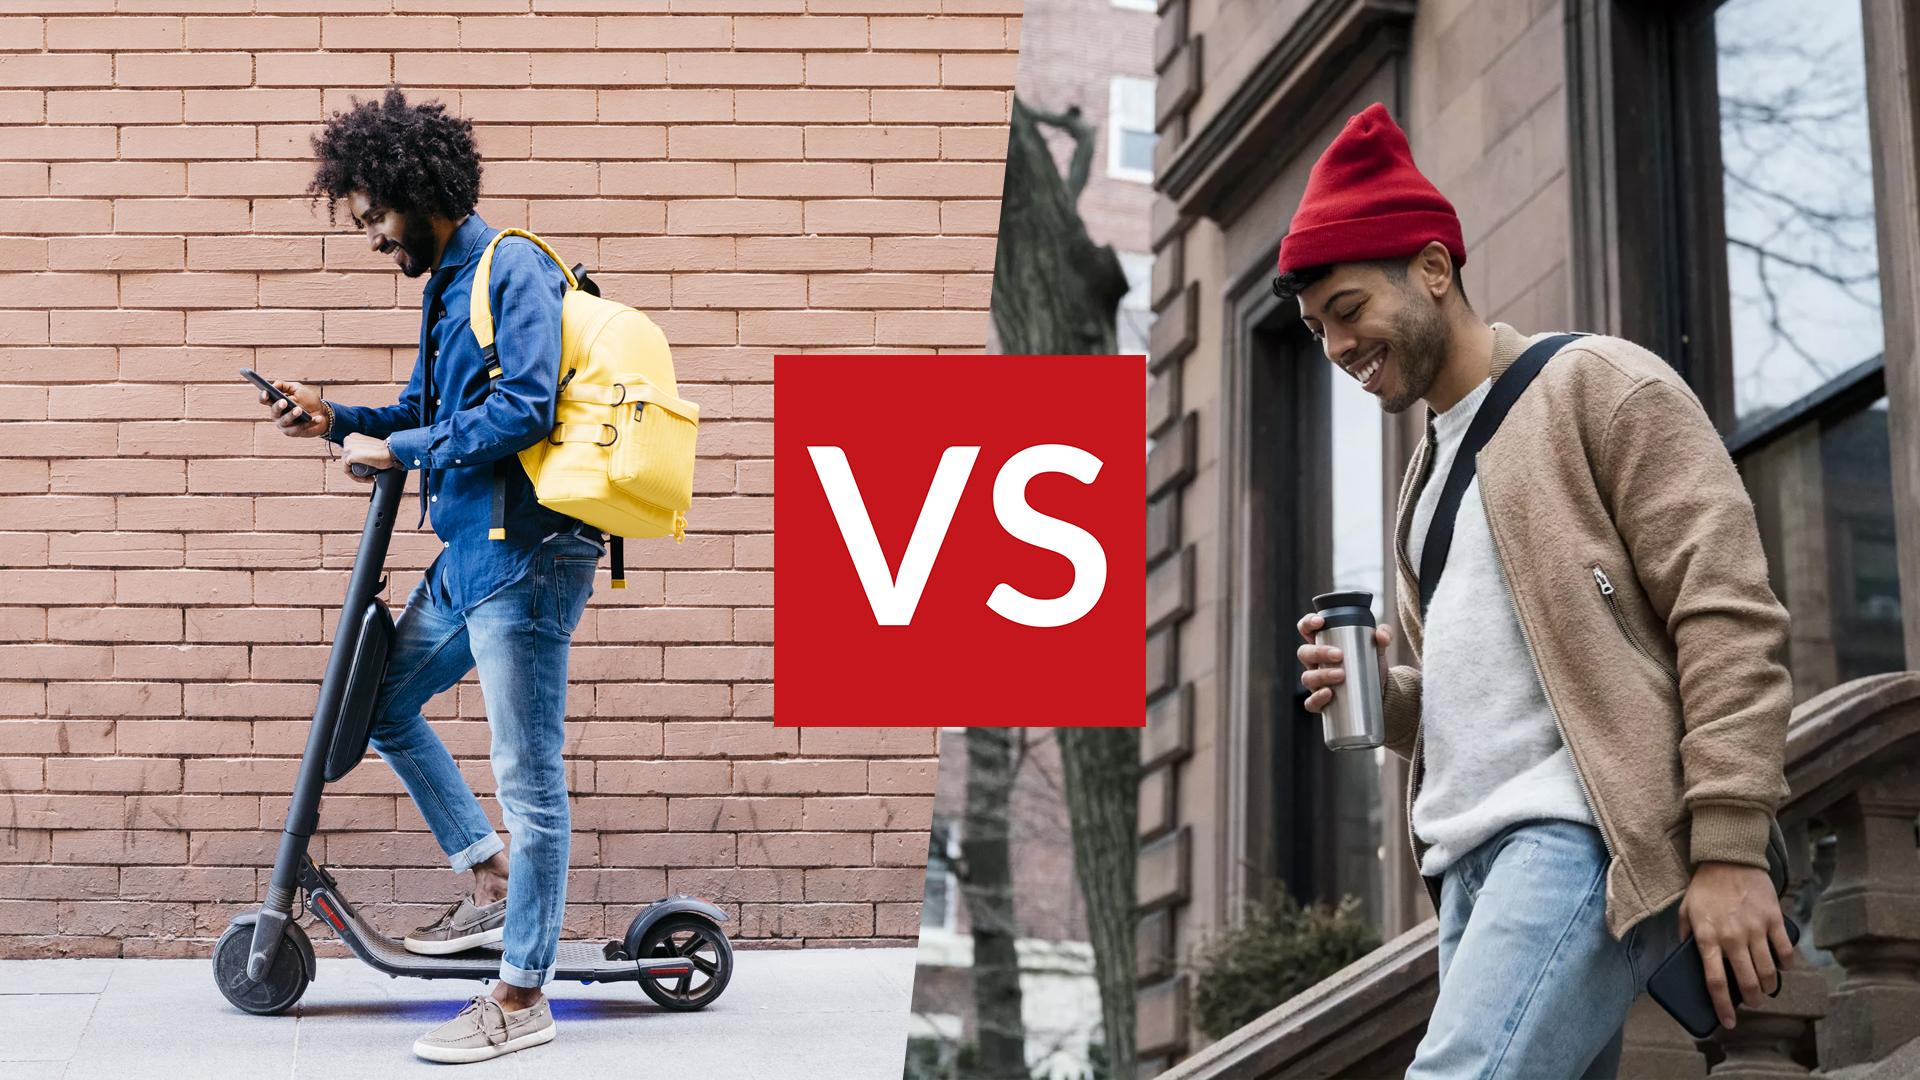 Backpack vs messenger bag: which one should you carry?